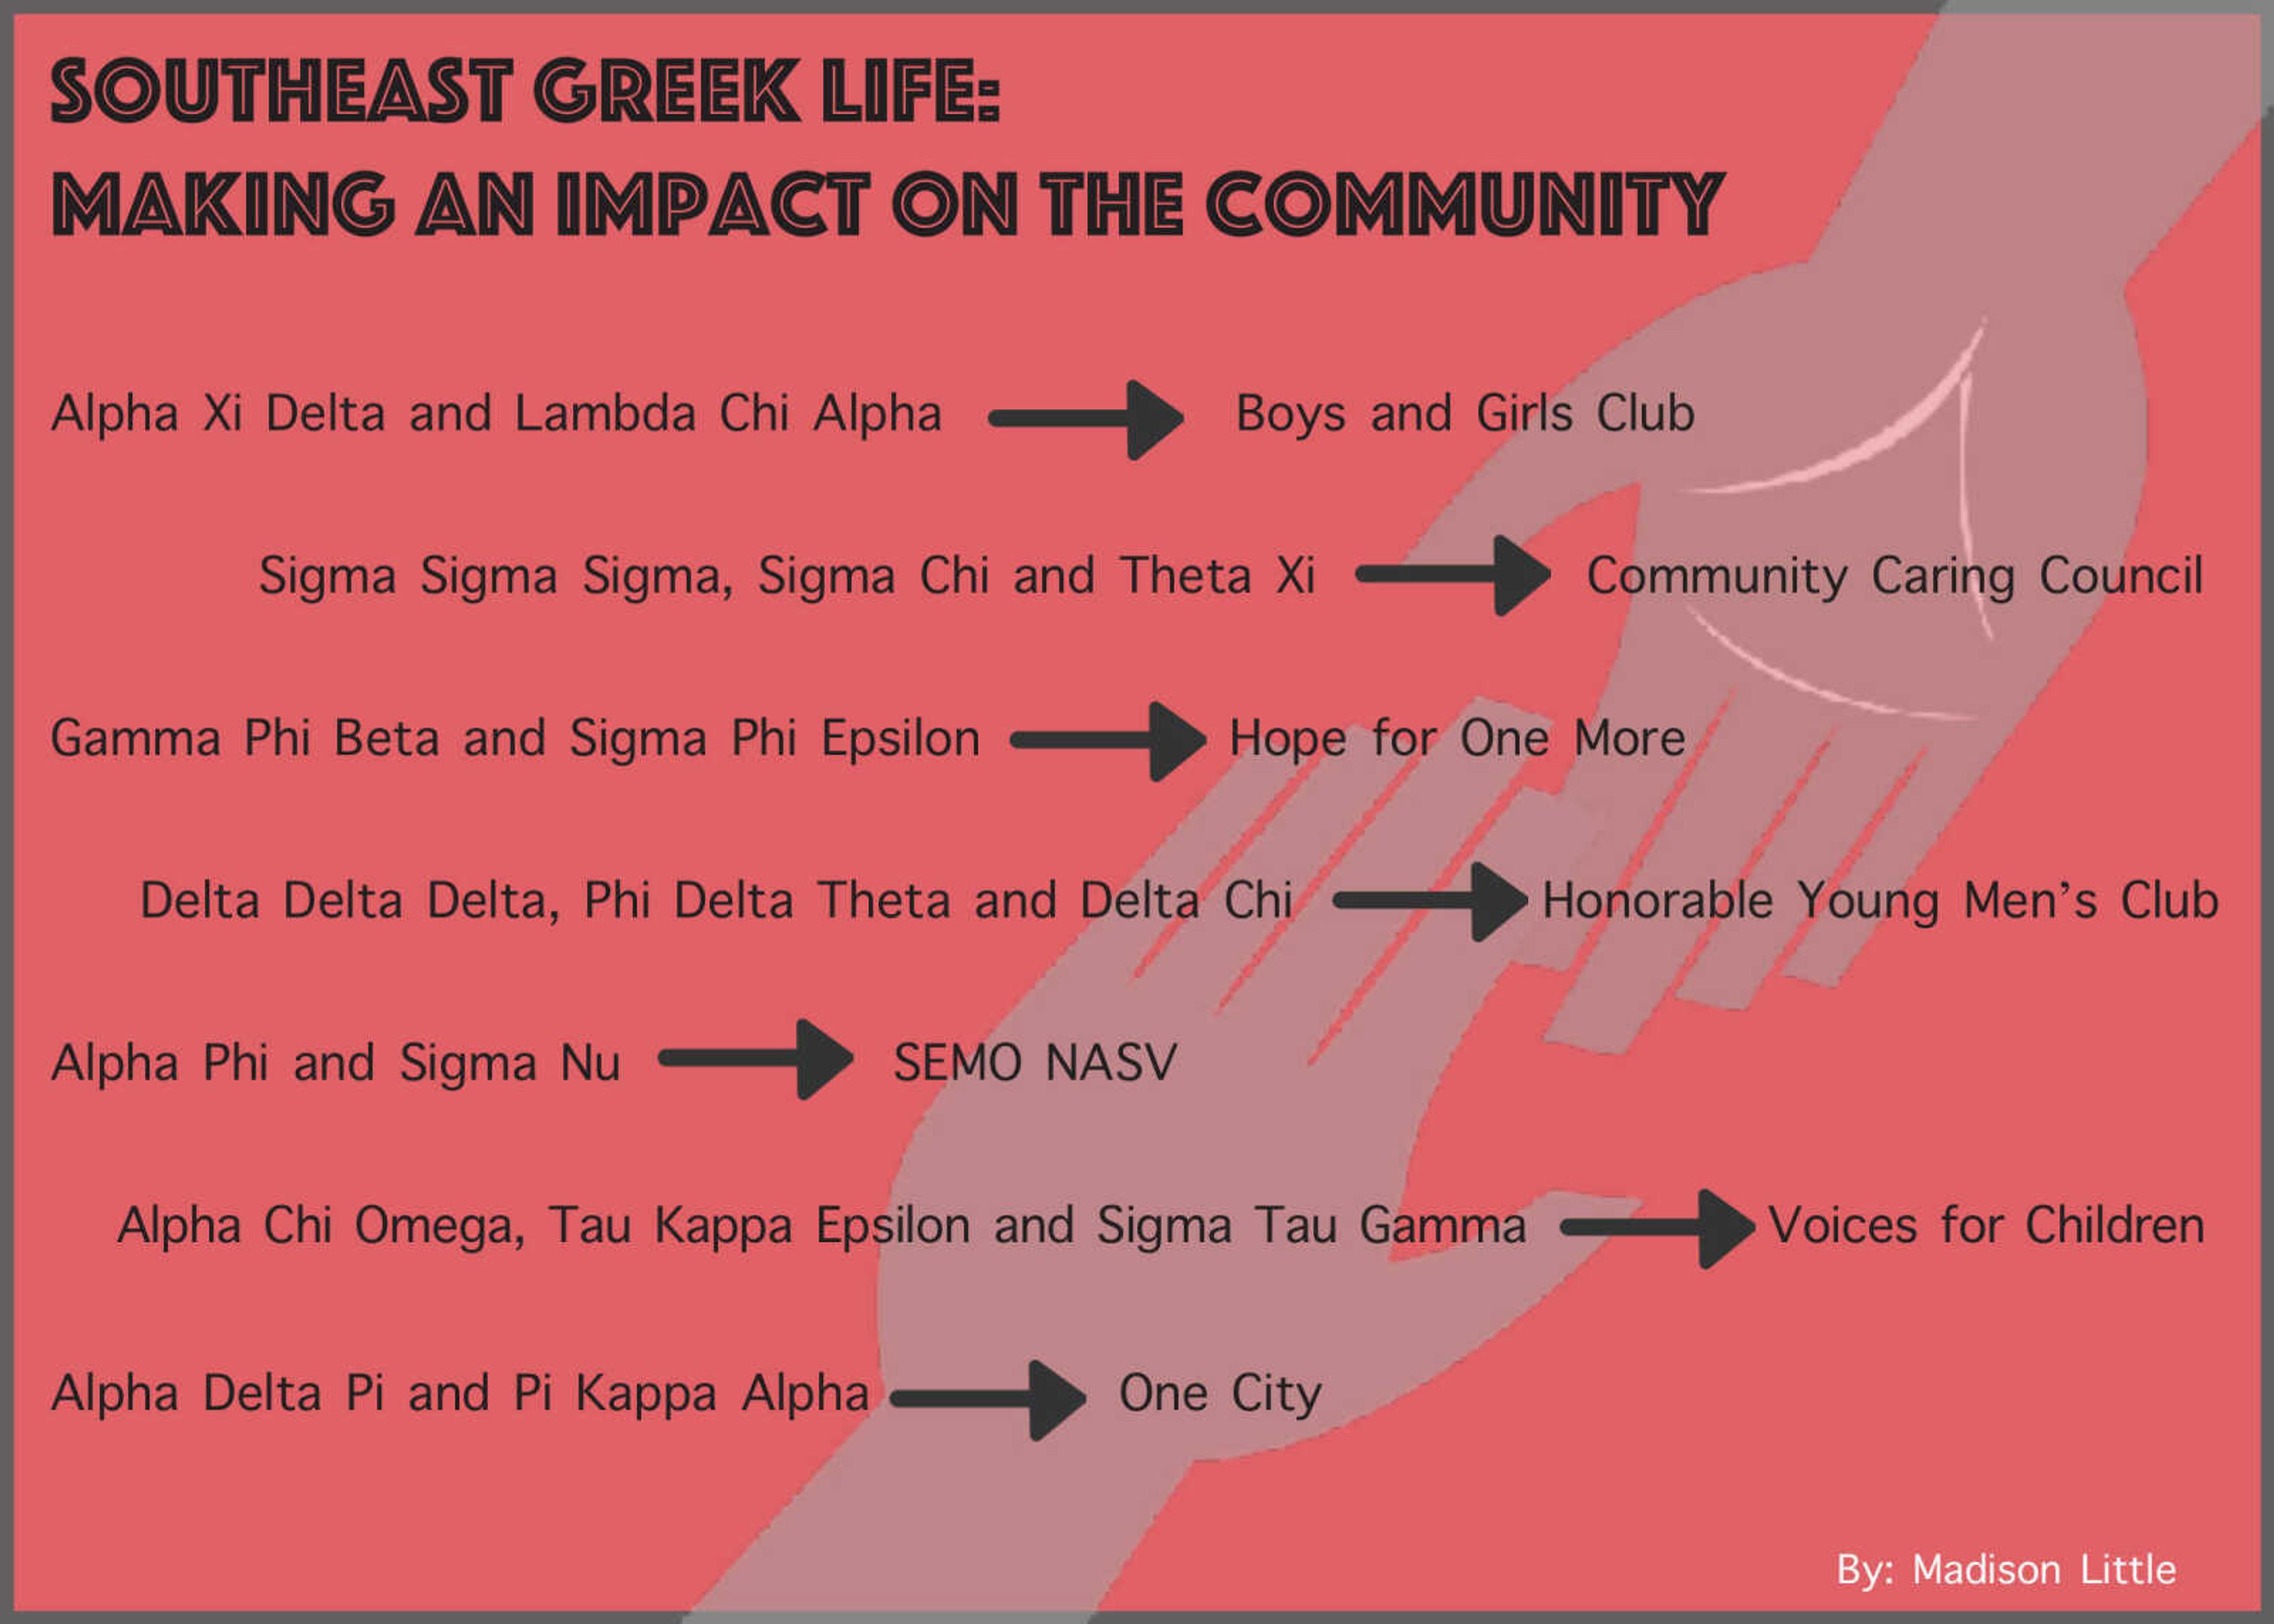 Greeks unite for a greater cause